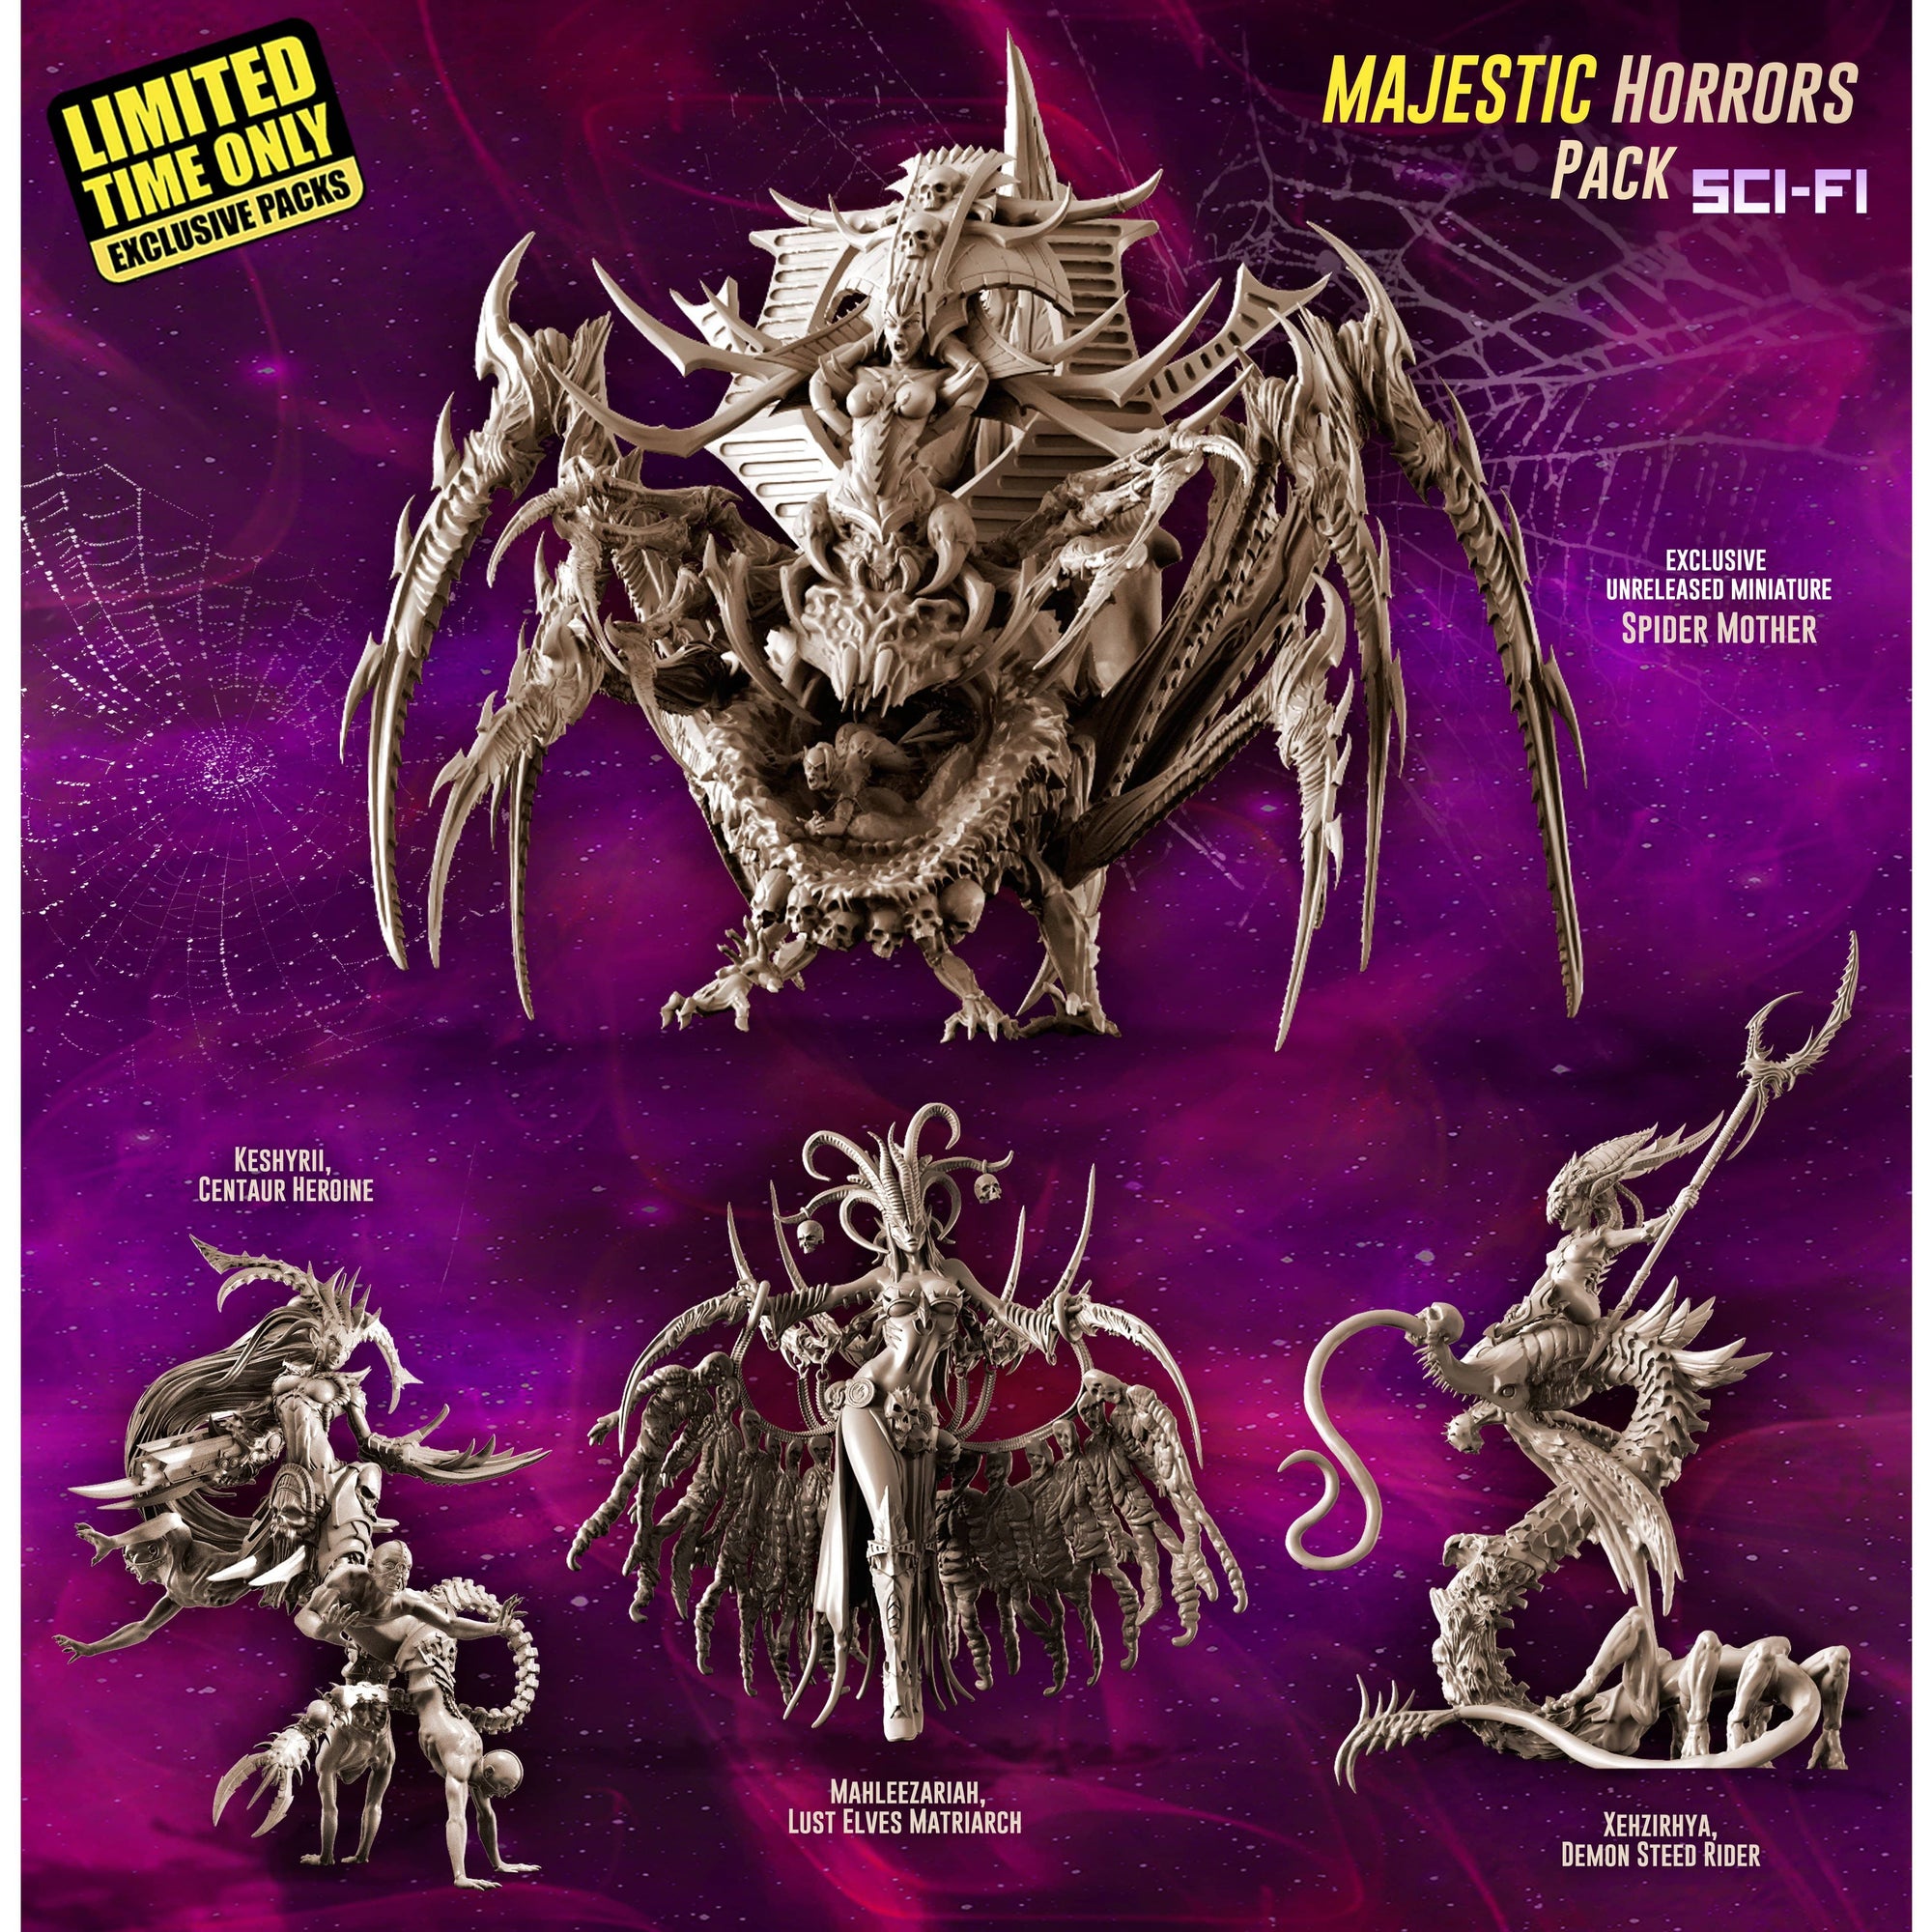 Exclusive MAJESTIC Horrors Pack (LE - SCI-FI)